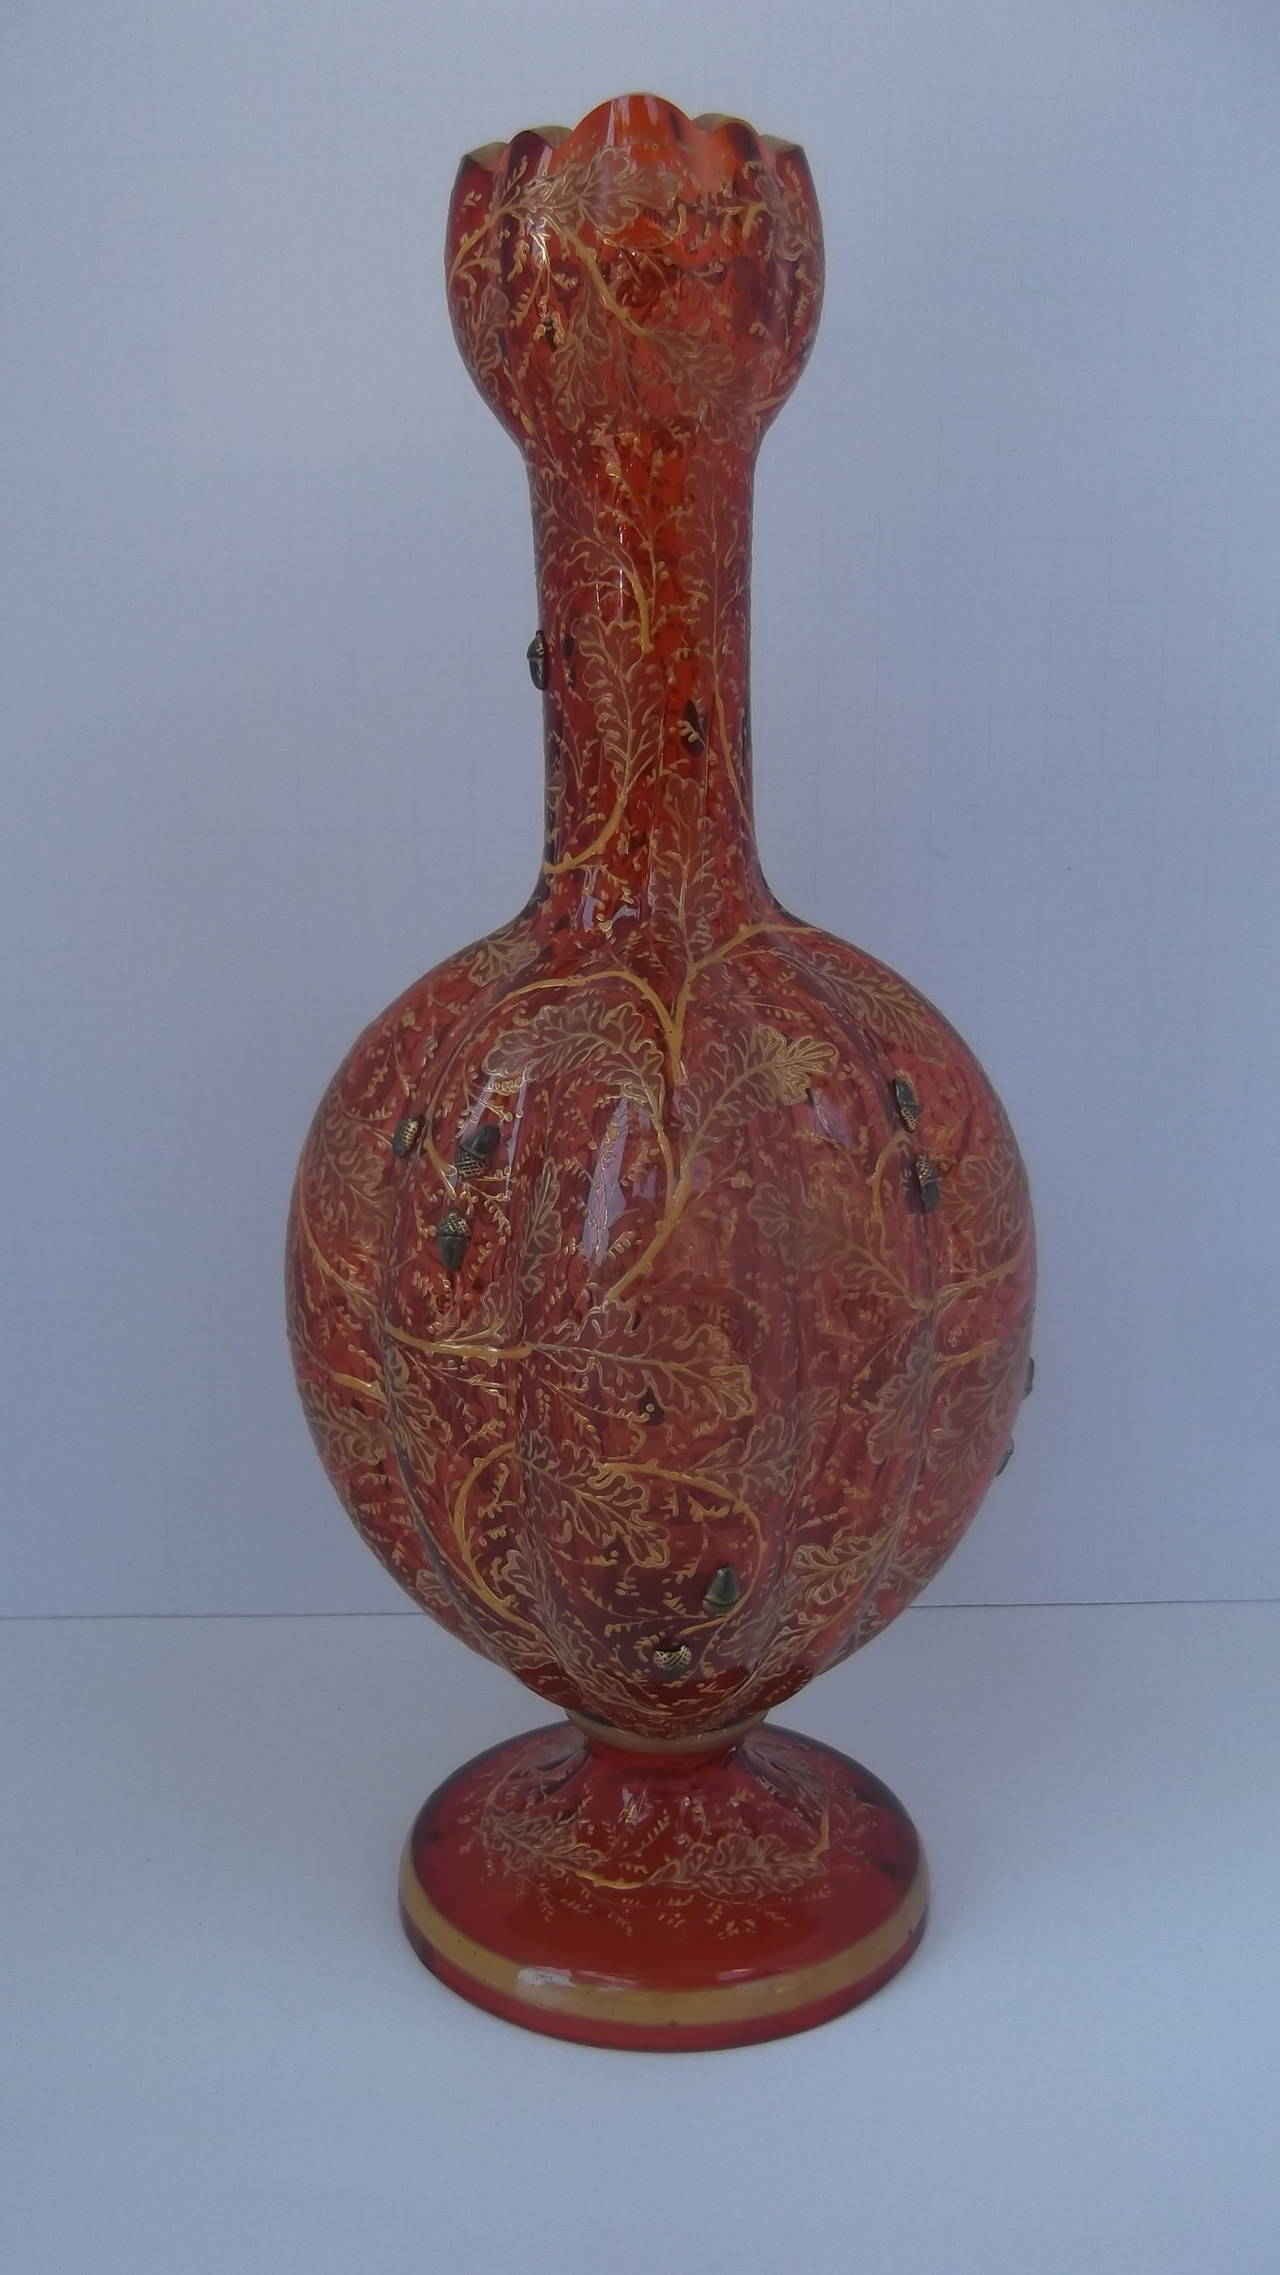 Intricate Moser enameled vase with oak leaves with small and very detailed acorns.  Lovely ruby hand blown glass in a gourd form with scalloped top, bulbous middle and circular pedestal base. The all over enamel decoration is applied by hand.